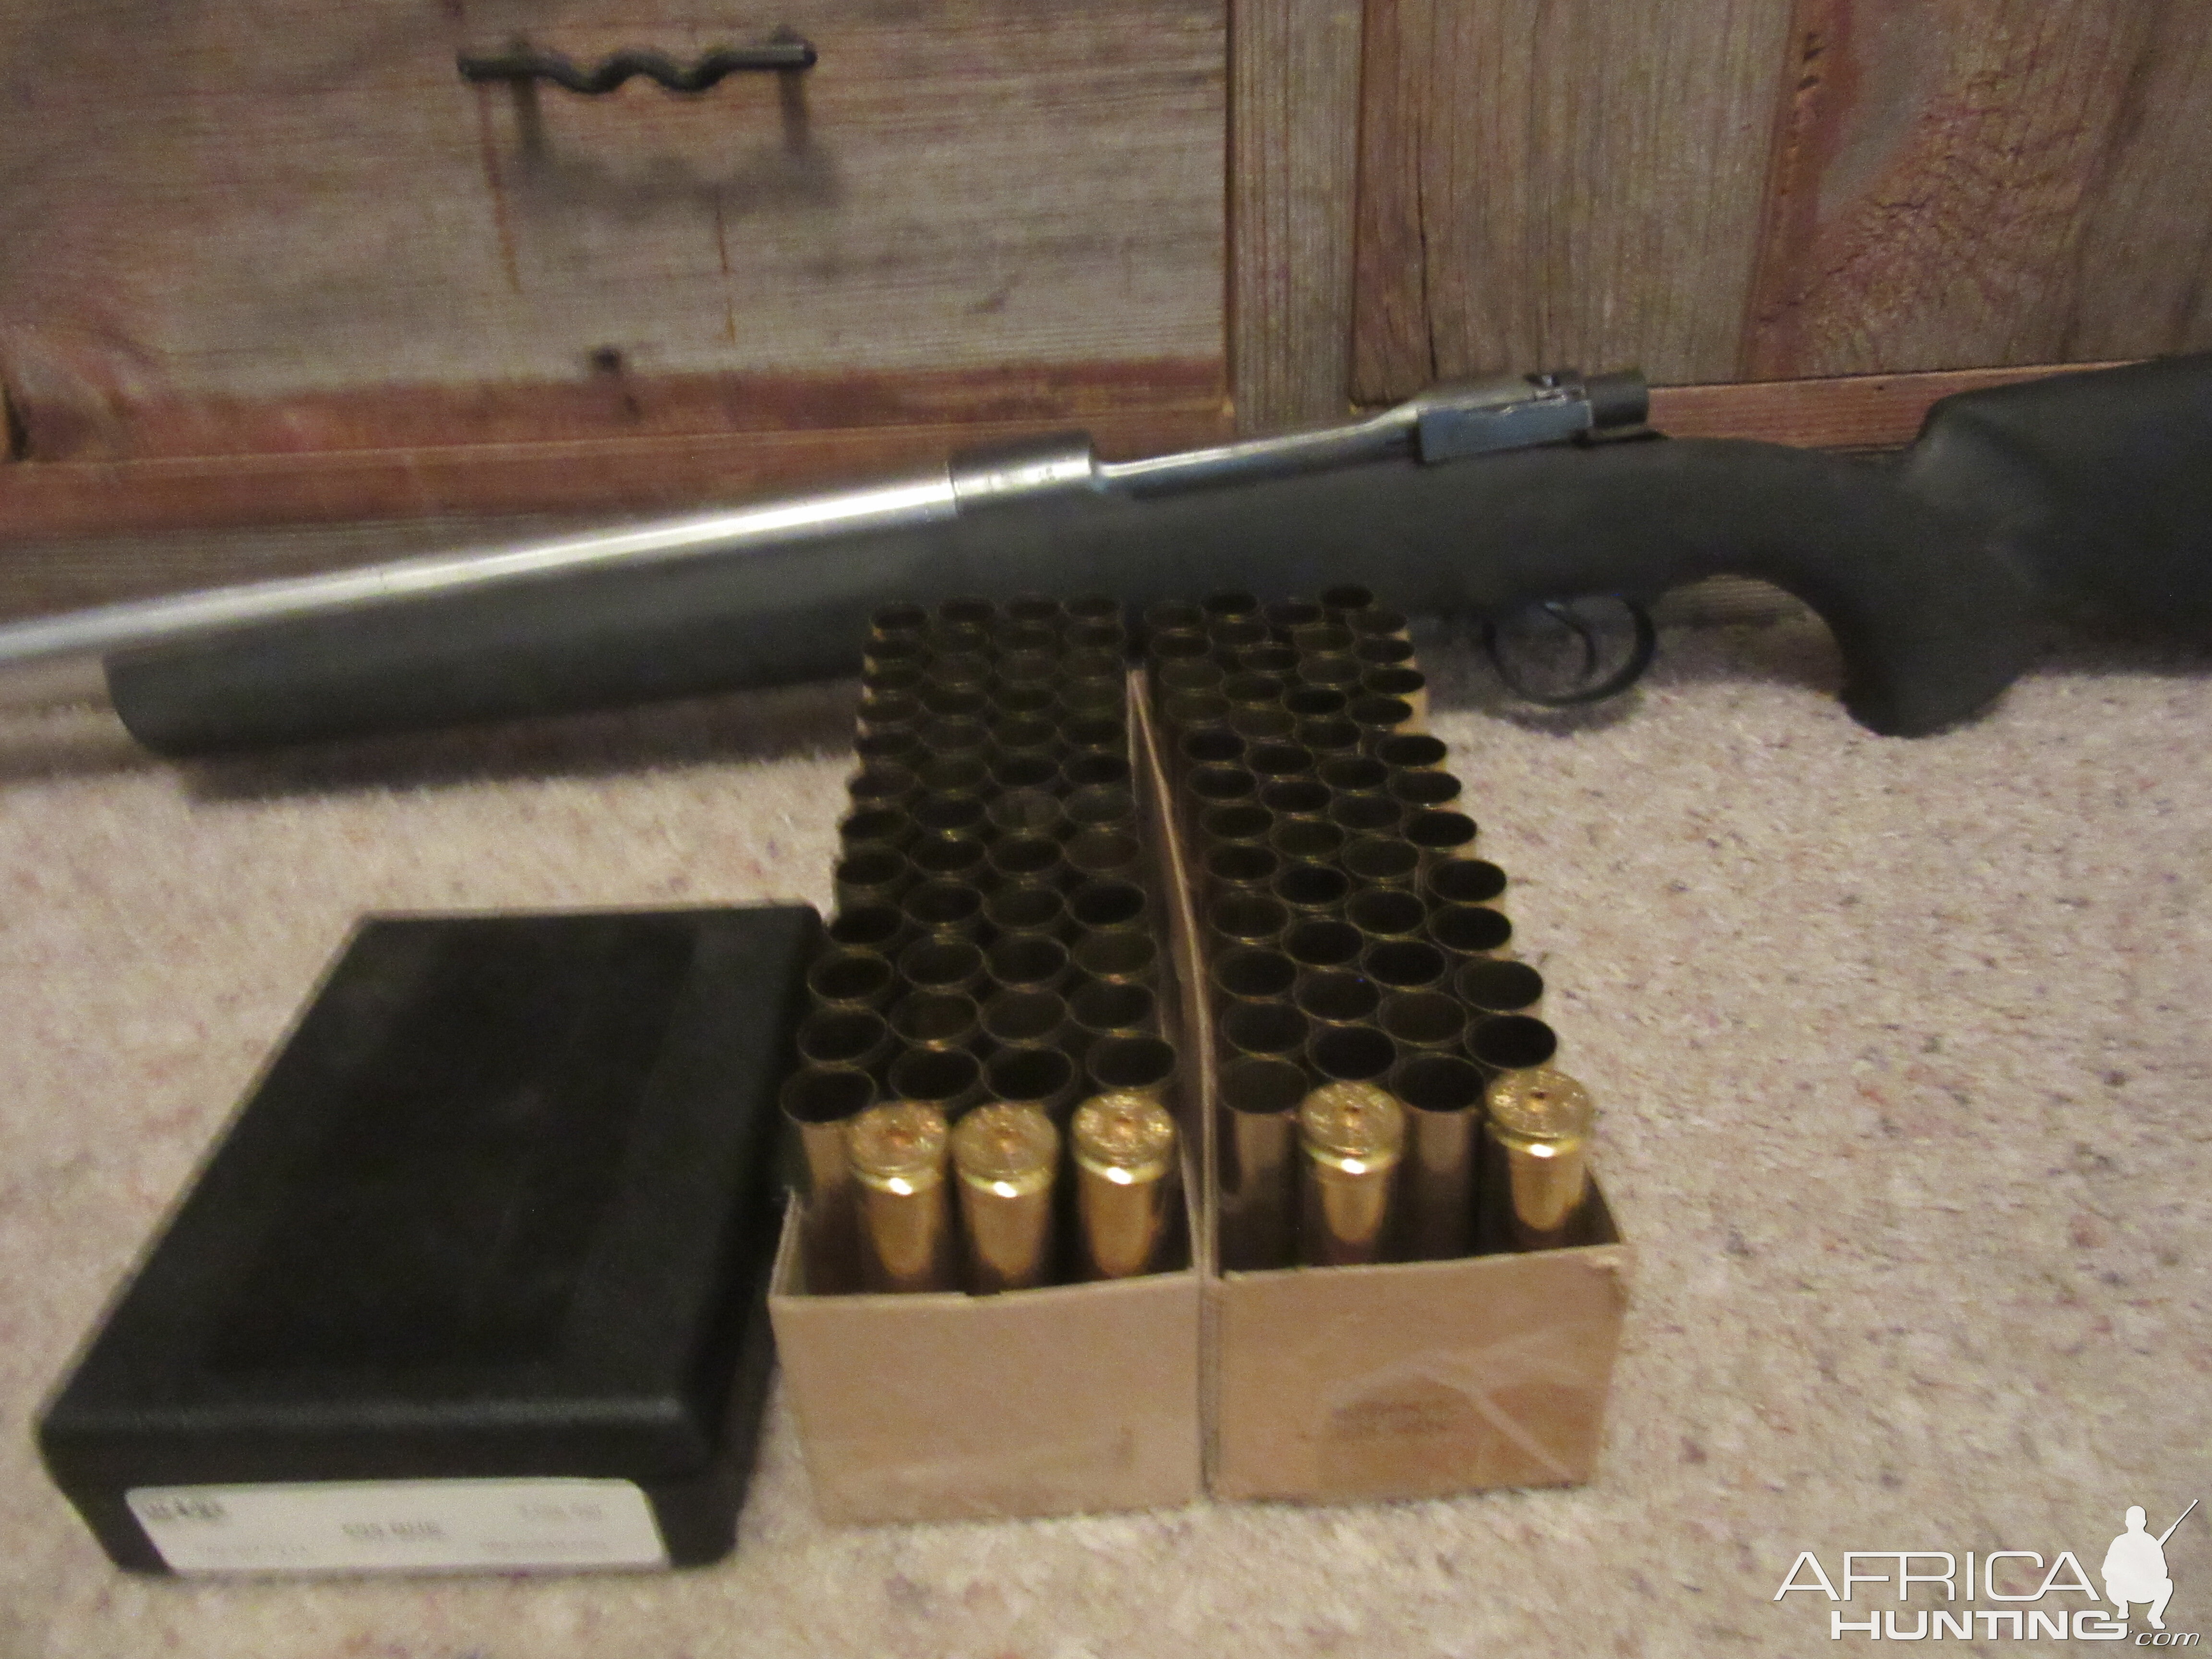 585 Hubel Rifle with Enfield action & Brass